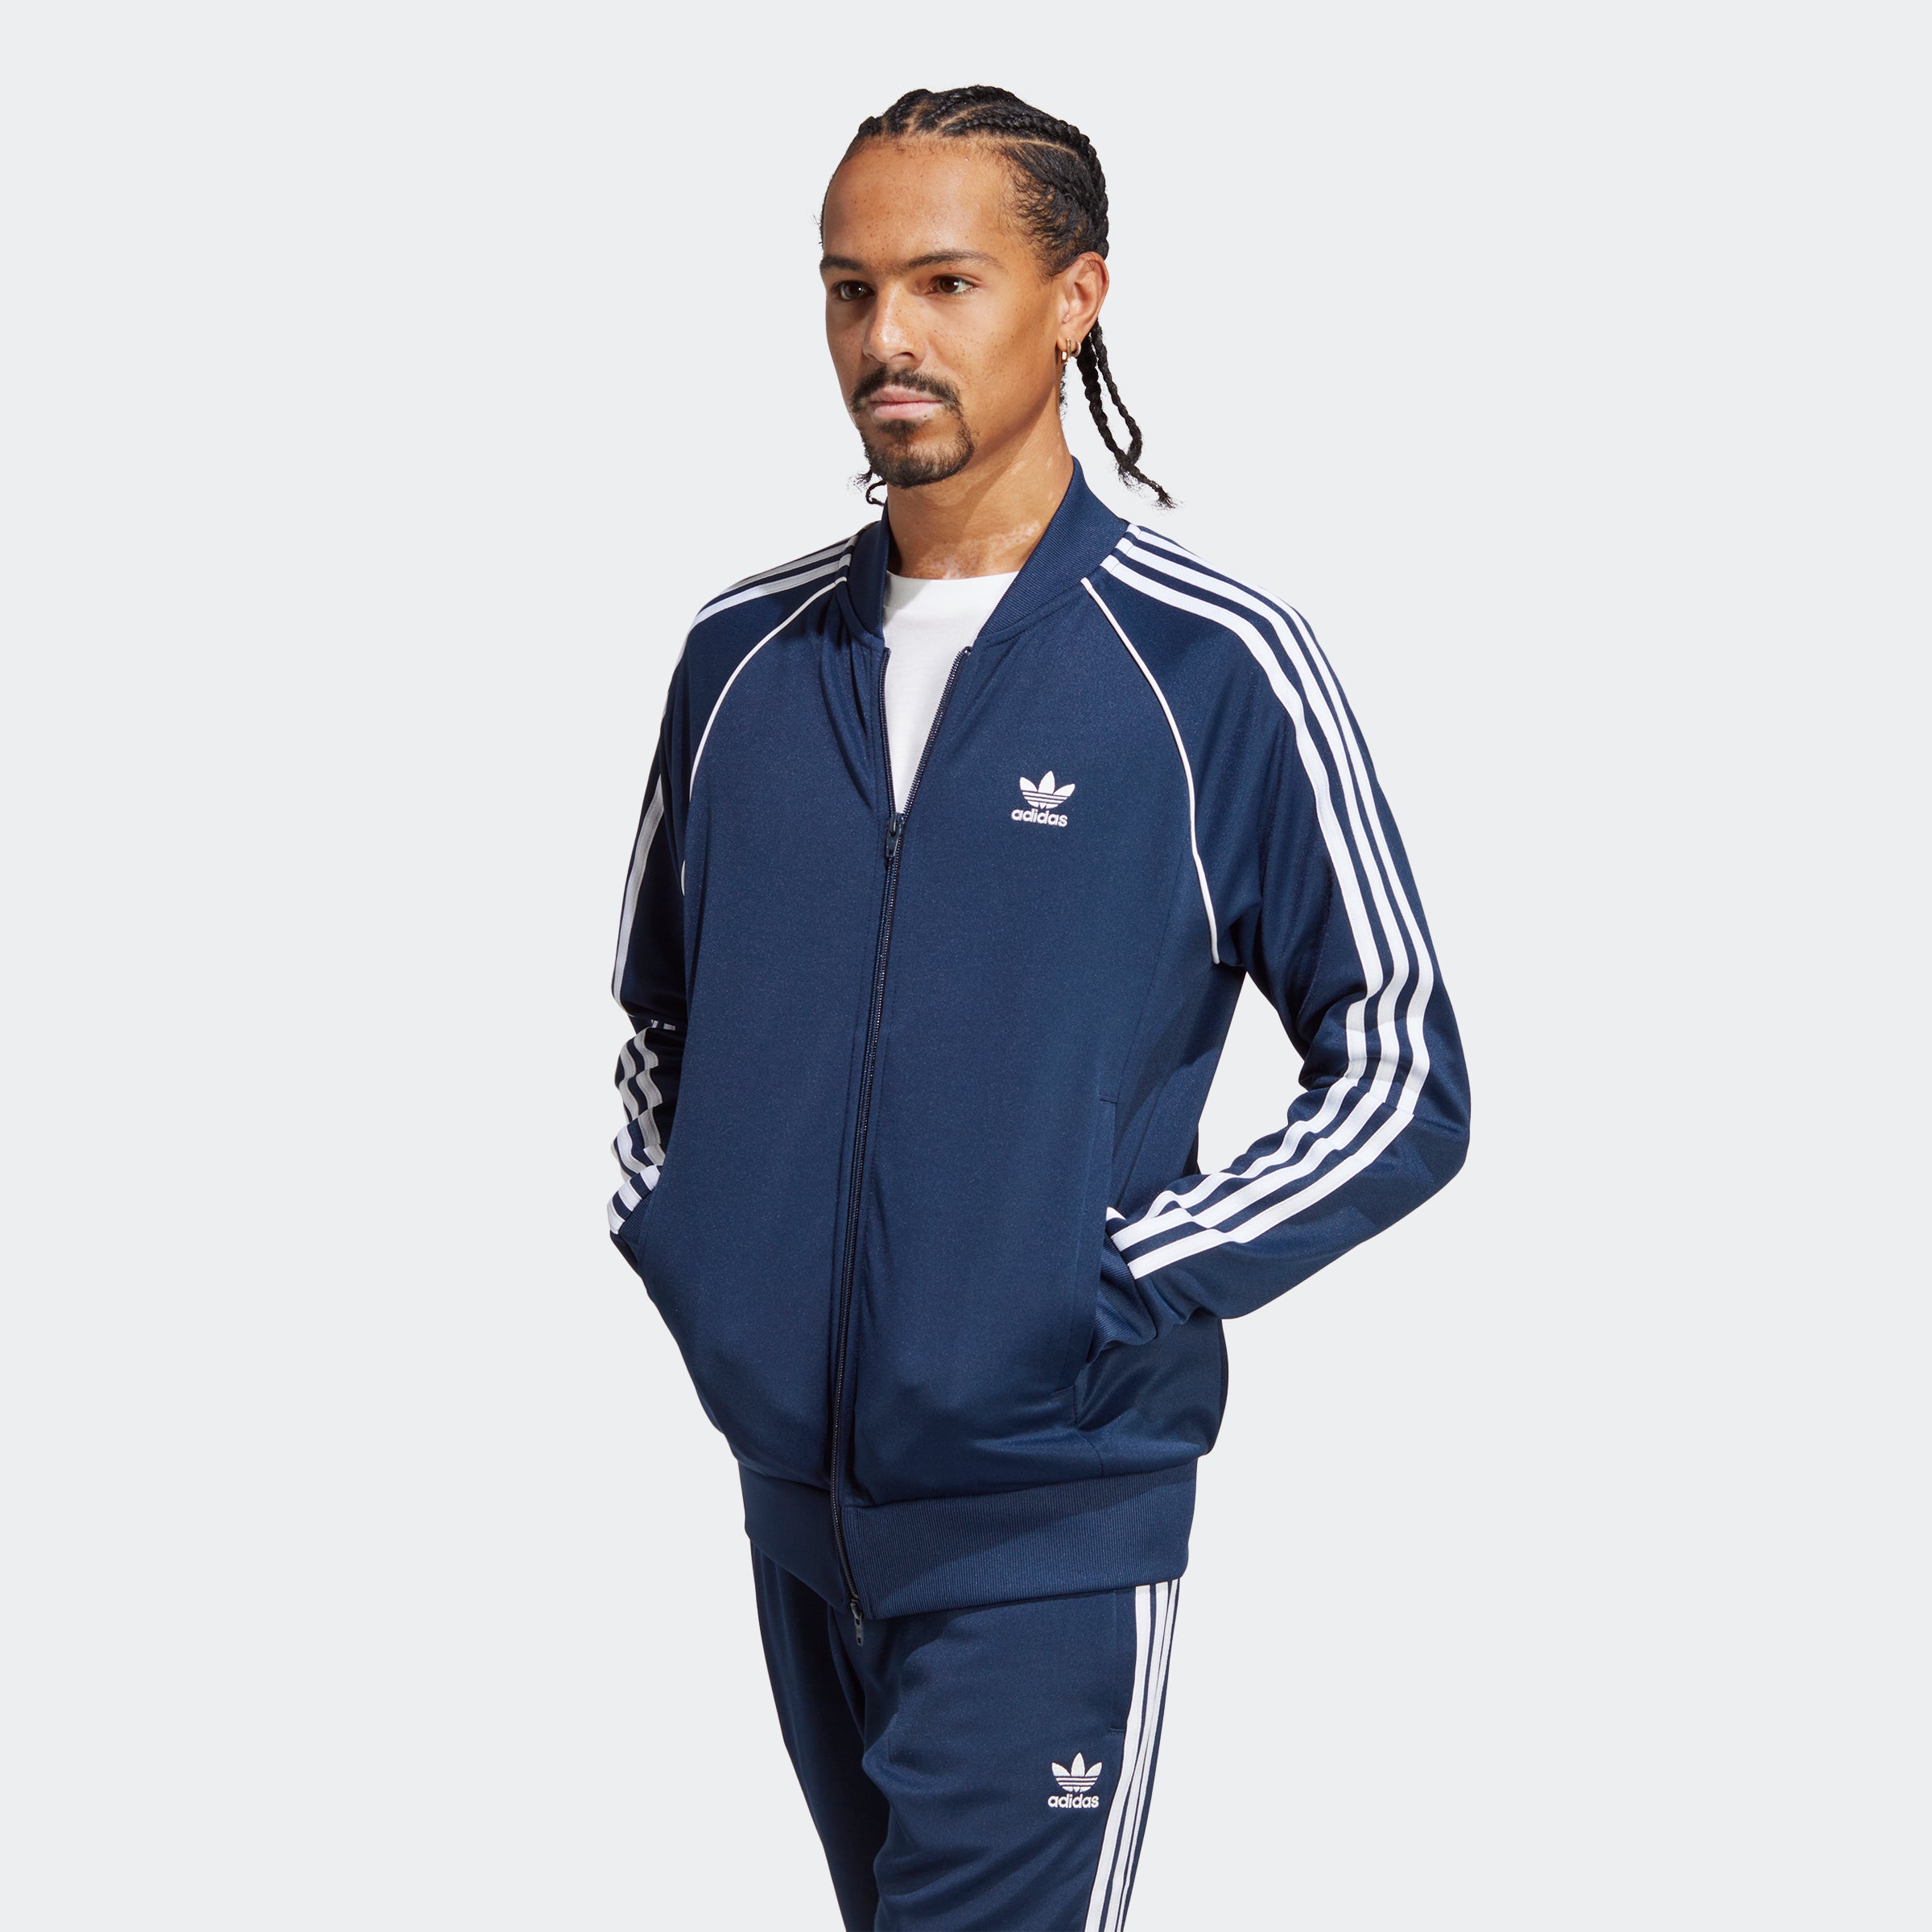 adidas Adicolor Blue SST Track Pants  Track pants outfit, Adidas outfit,  Sporty outfits